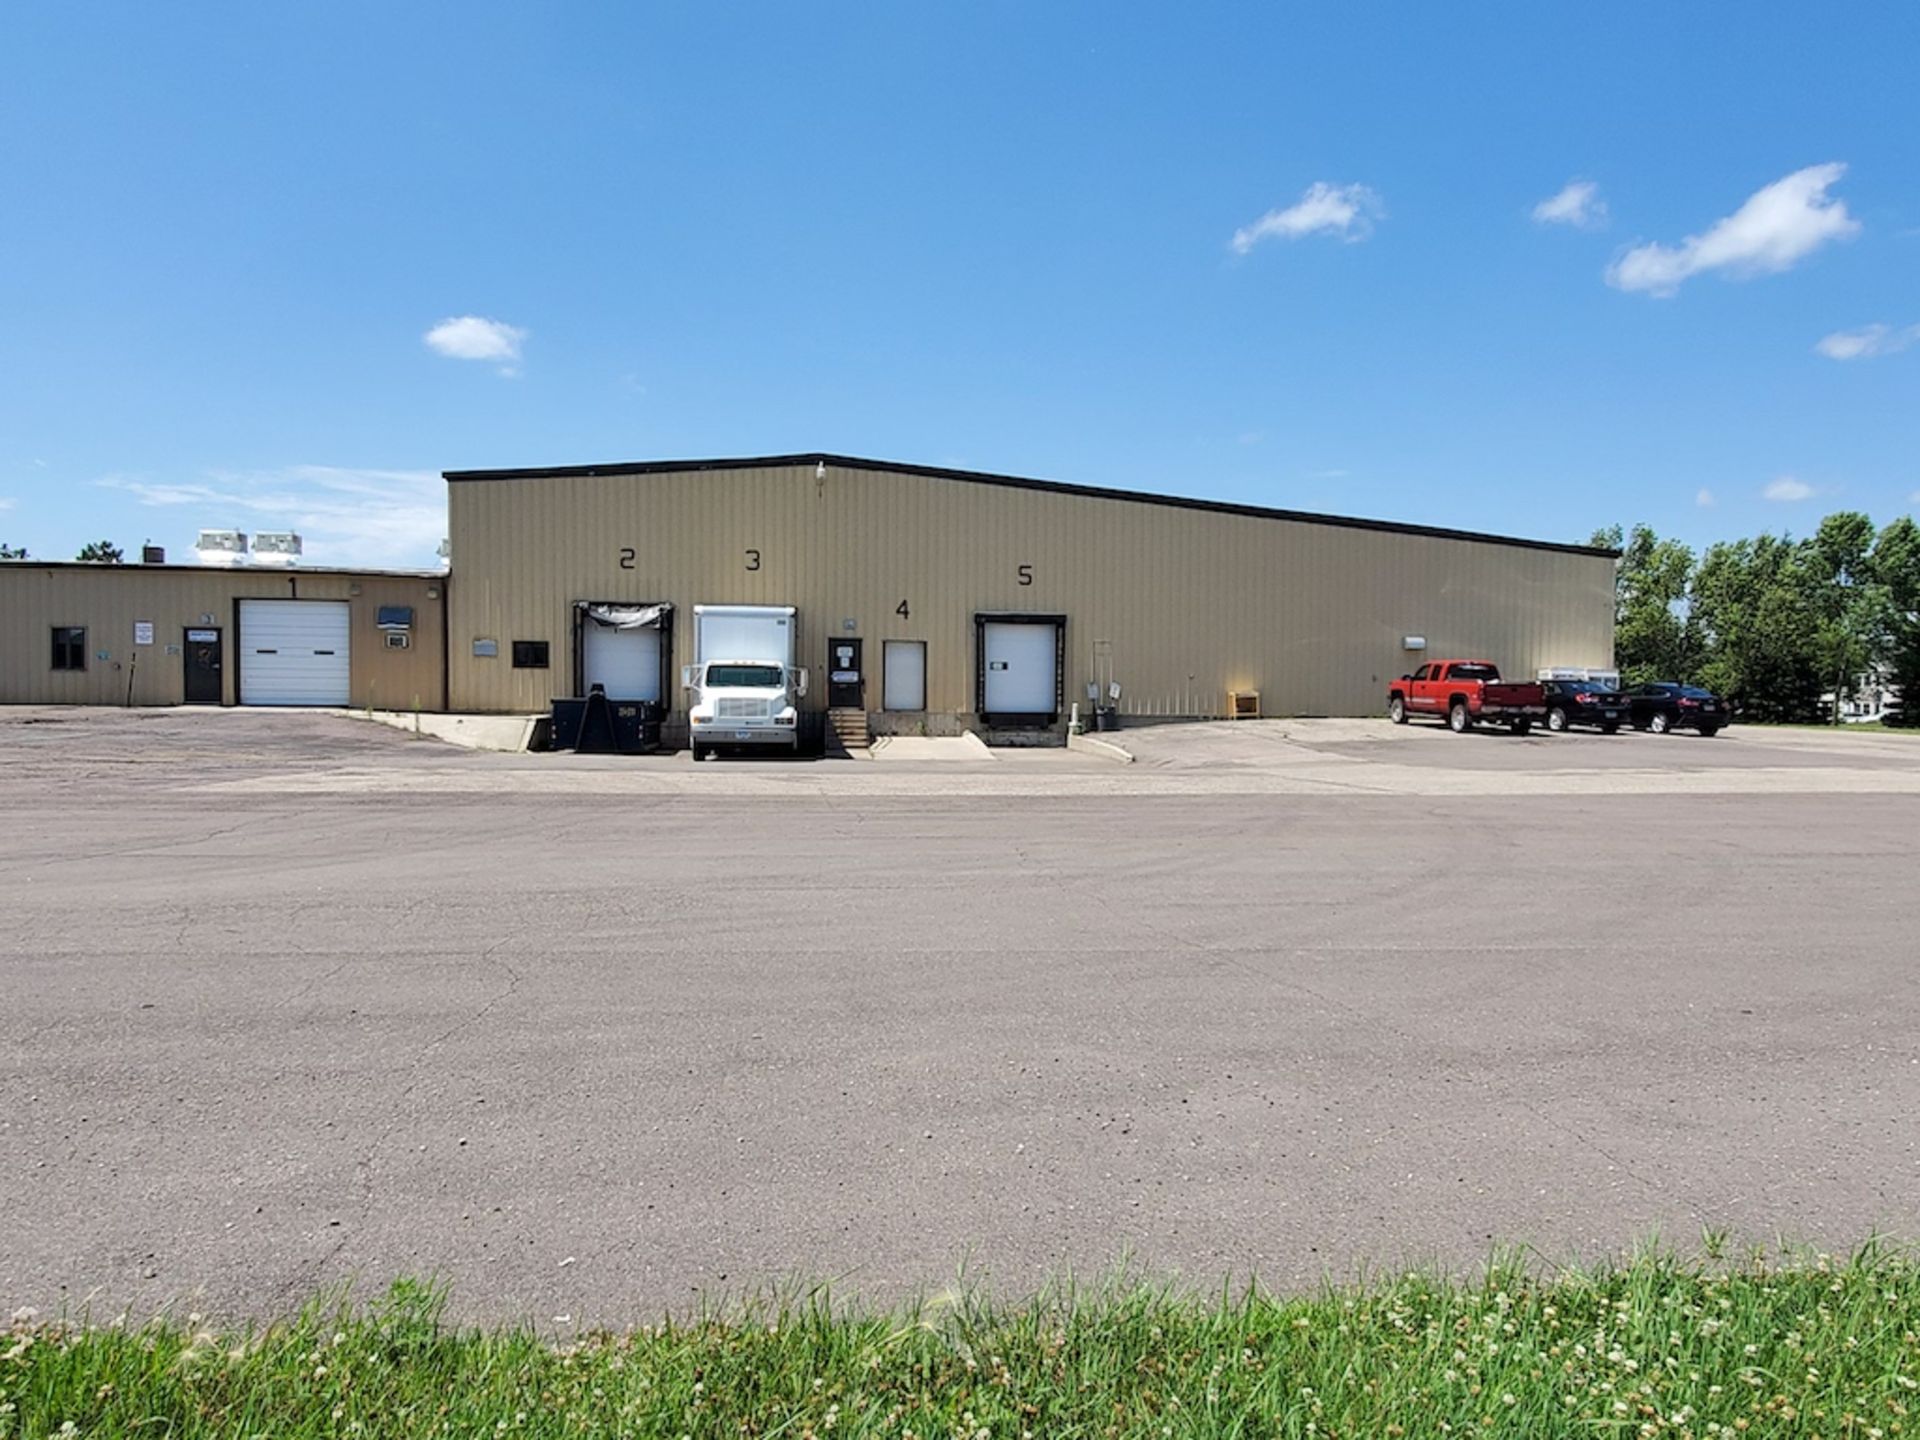 Real Estate - (3) Buildings, 85,550 Total sq./ft. on 12.75 Acres - Image 11 of 25